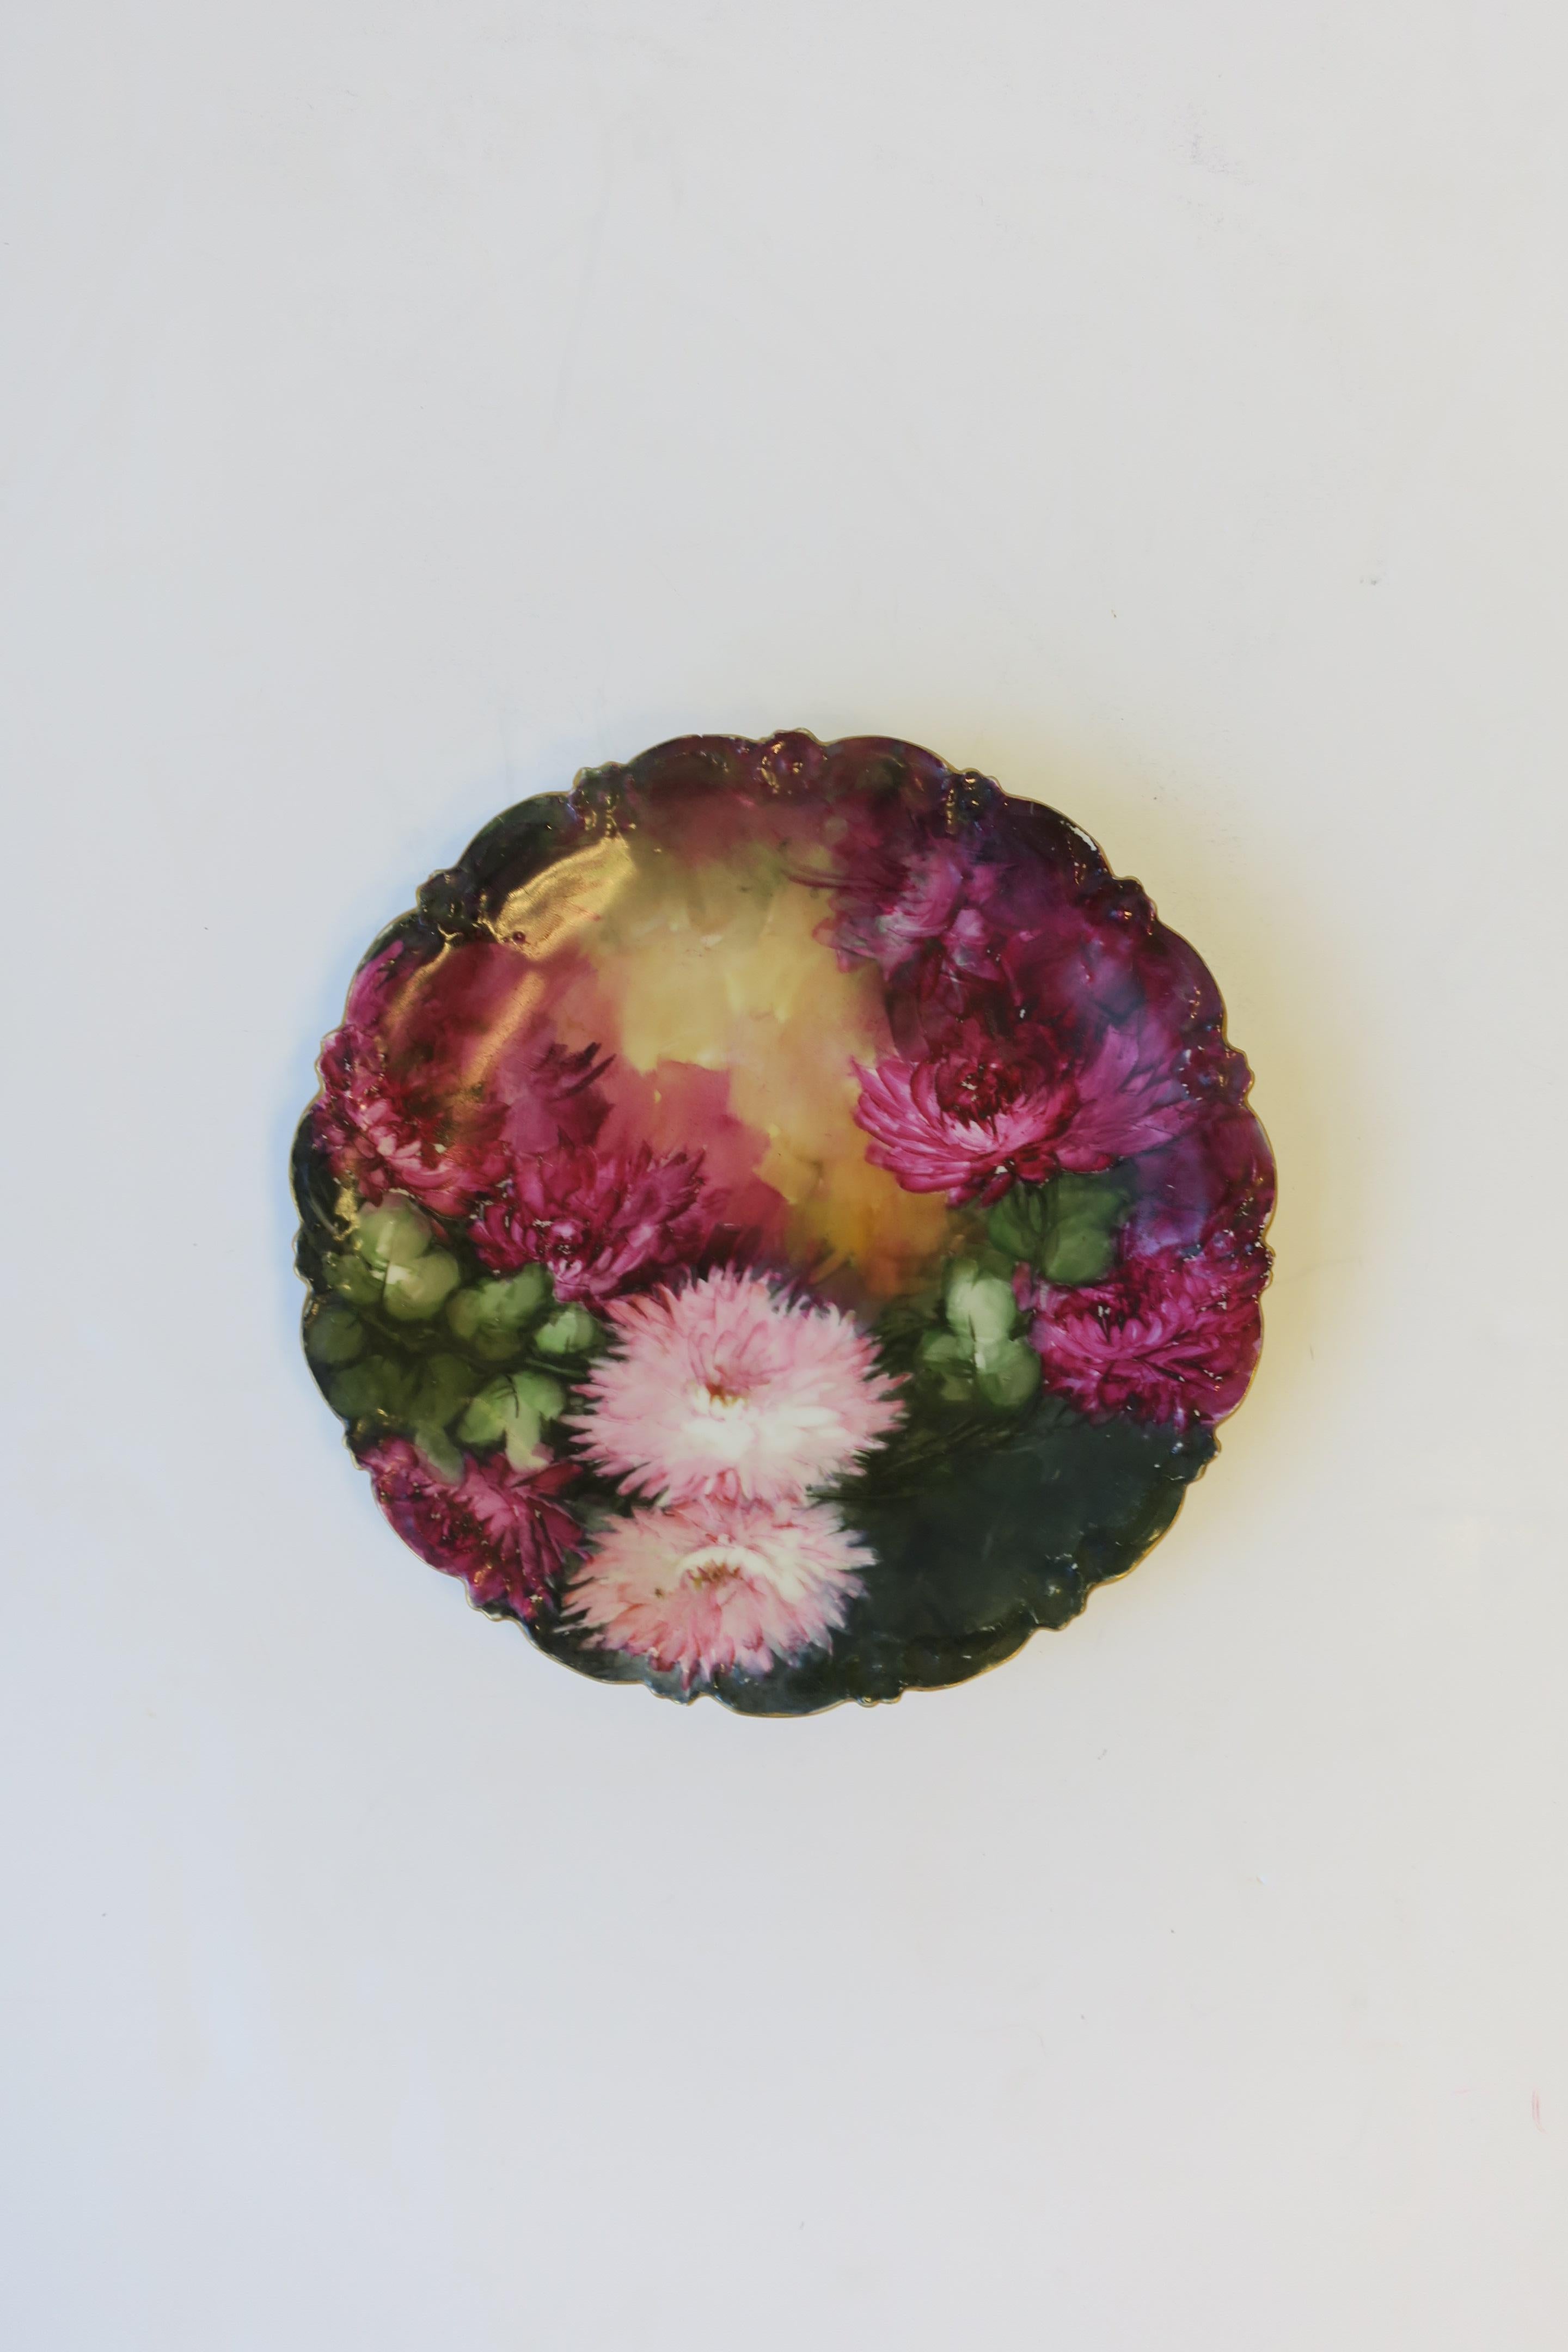 An early-20th century French hand-painted plate by T & V, Limoges, France. Plates' design is beautiful fuchsia-purple and pink mum flowers and green leaves, finished with a gold gilt scalloped edge. Maker's mark on bottom as show in last image.